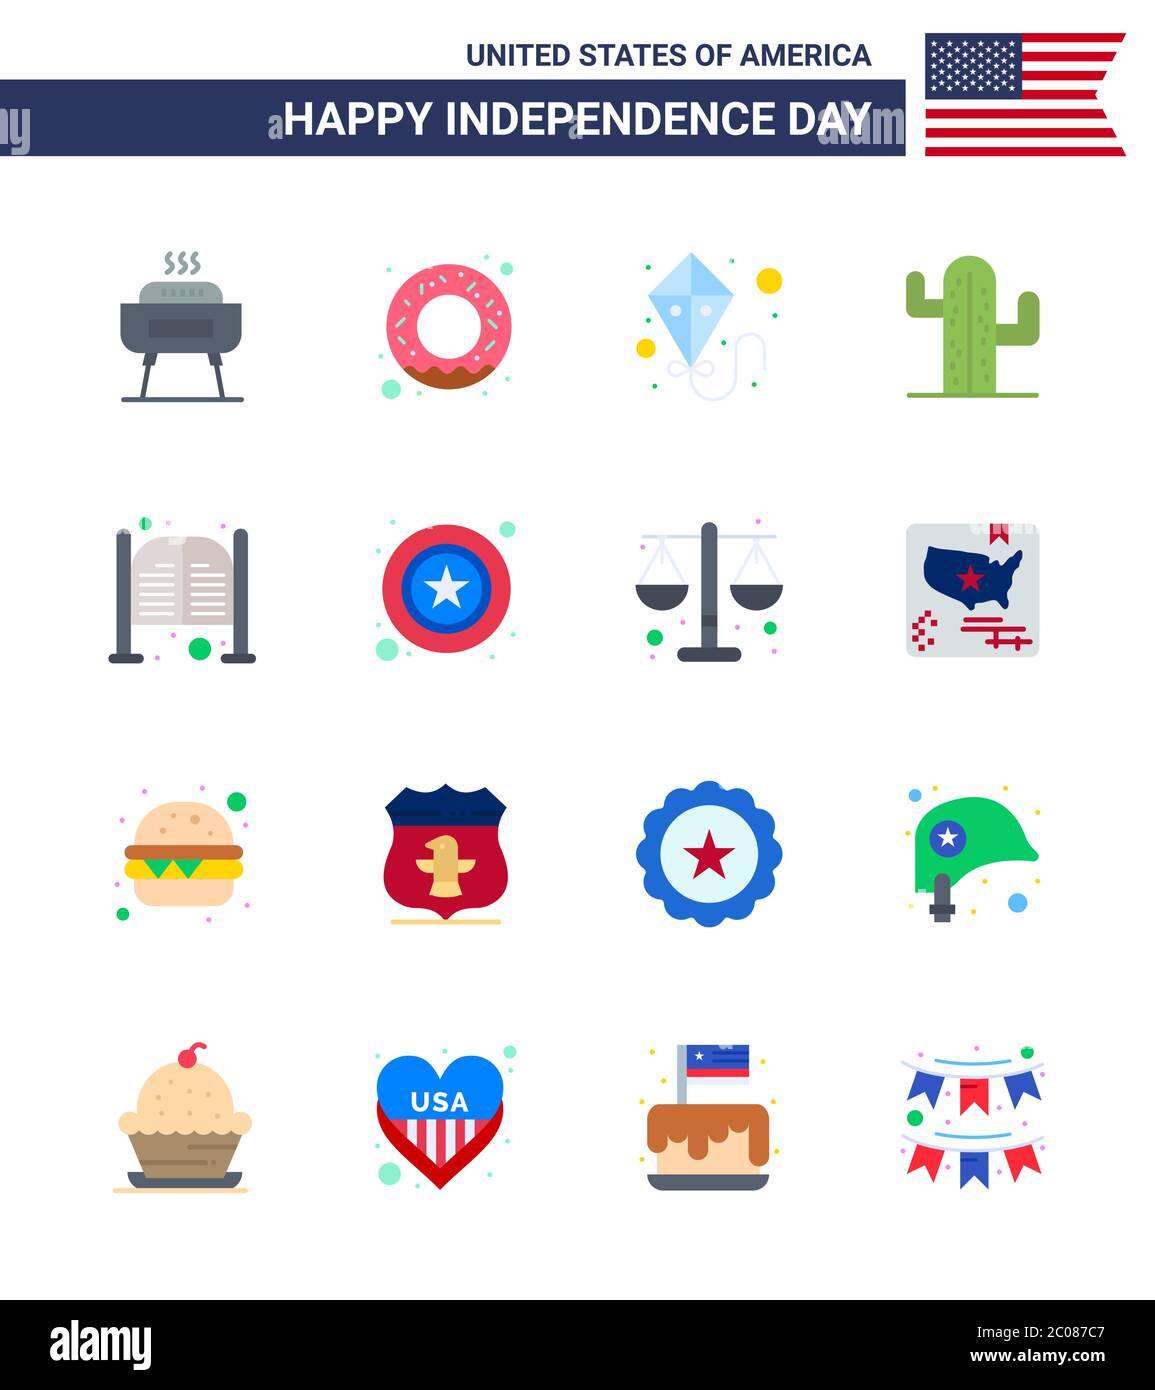 16 USA Flat Signs Independence Day Celebration Symbols of day; doors; summer; bar; plent Editable USA Day Vector Design Elements Stock Vector